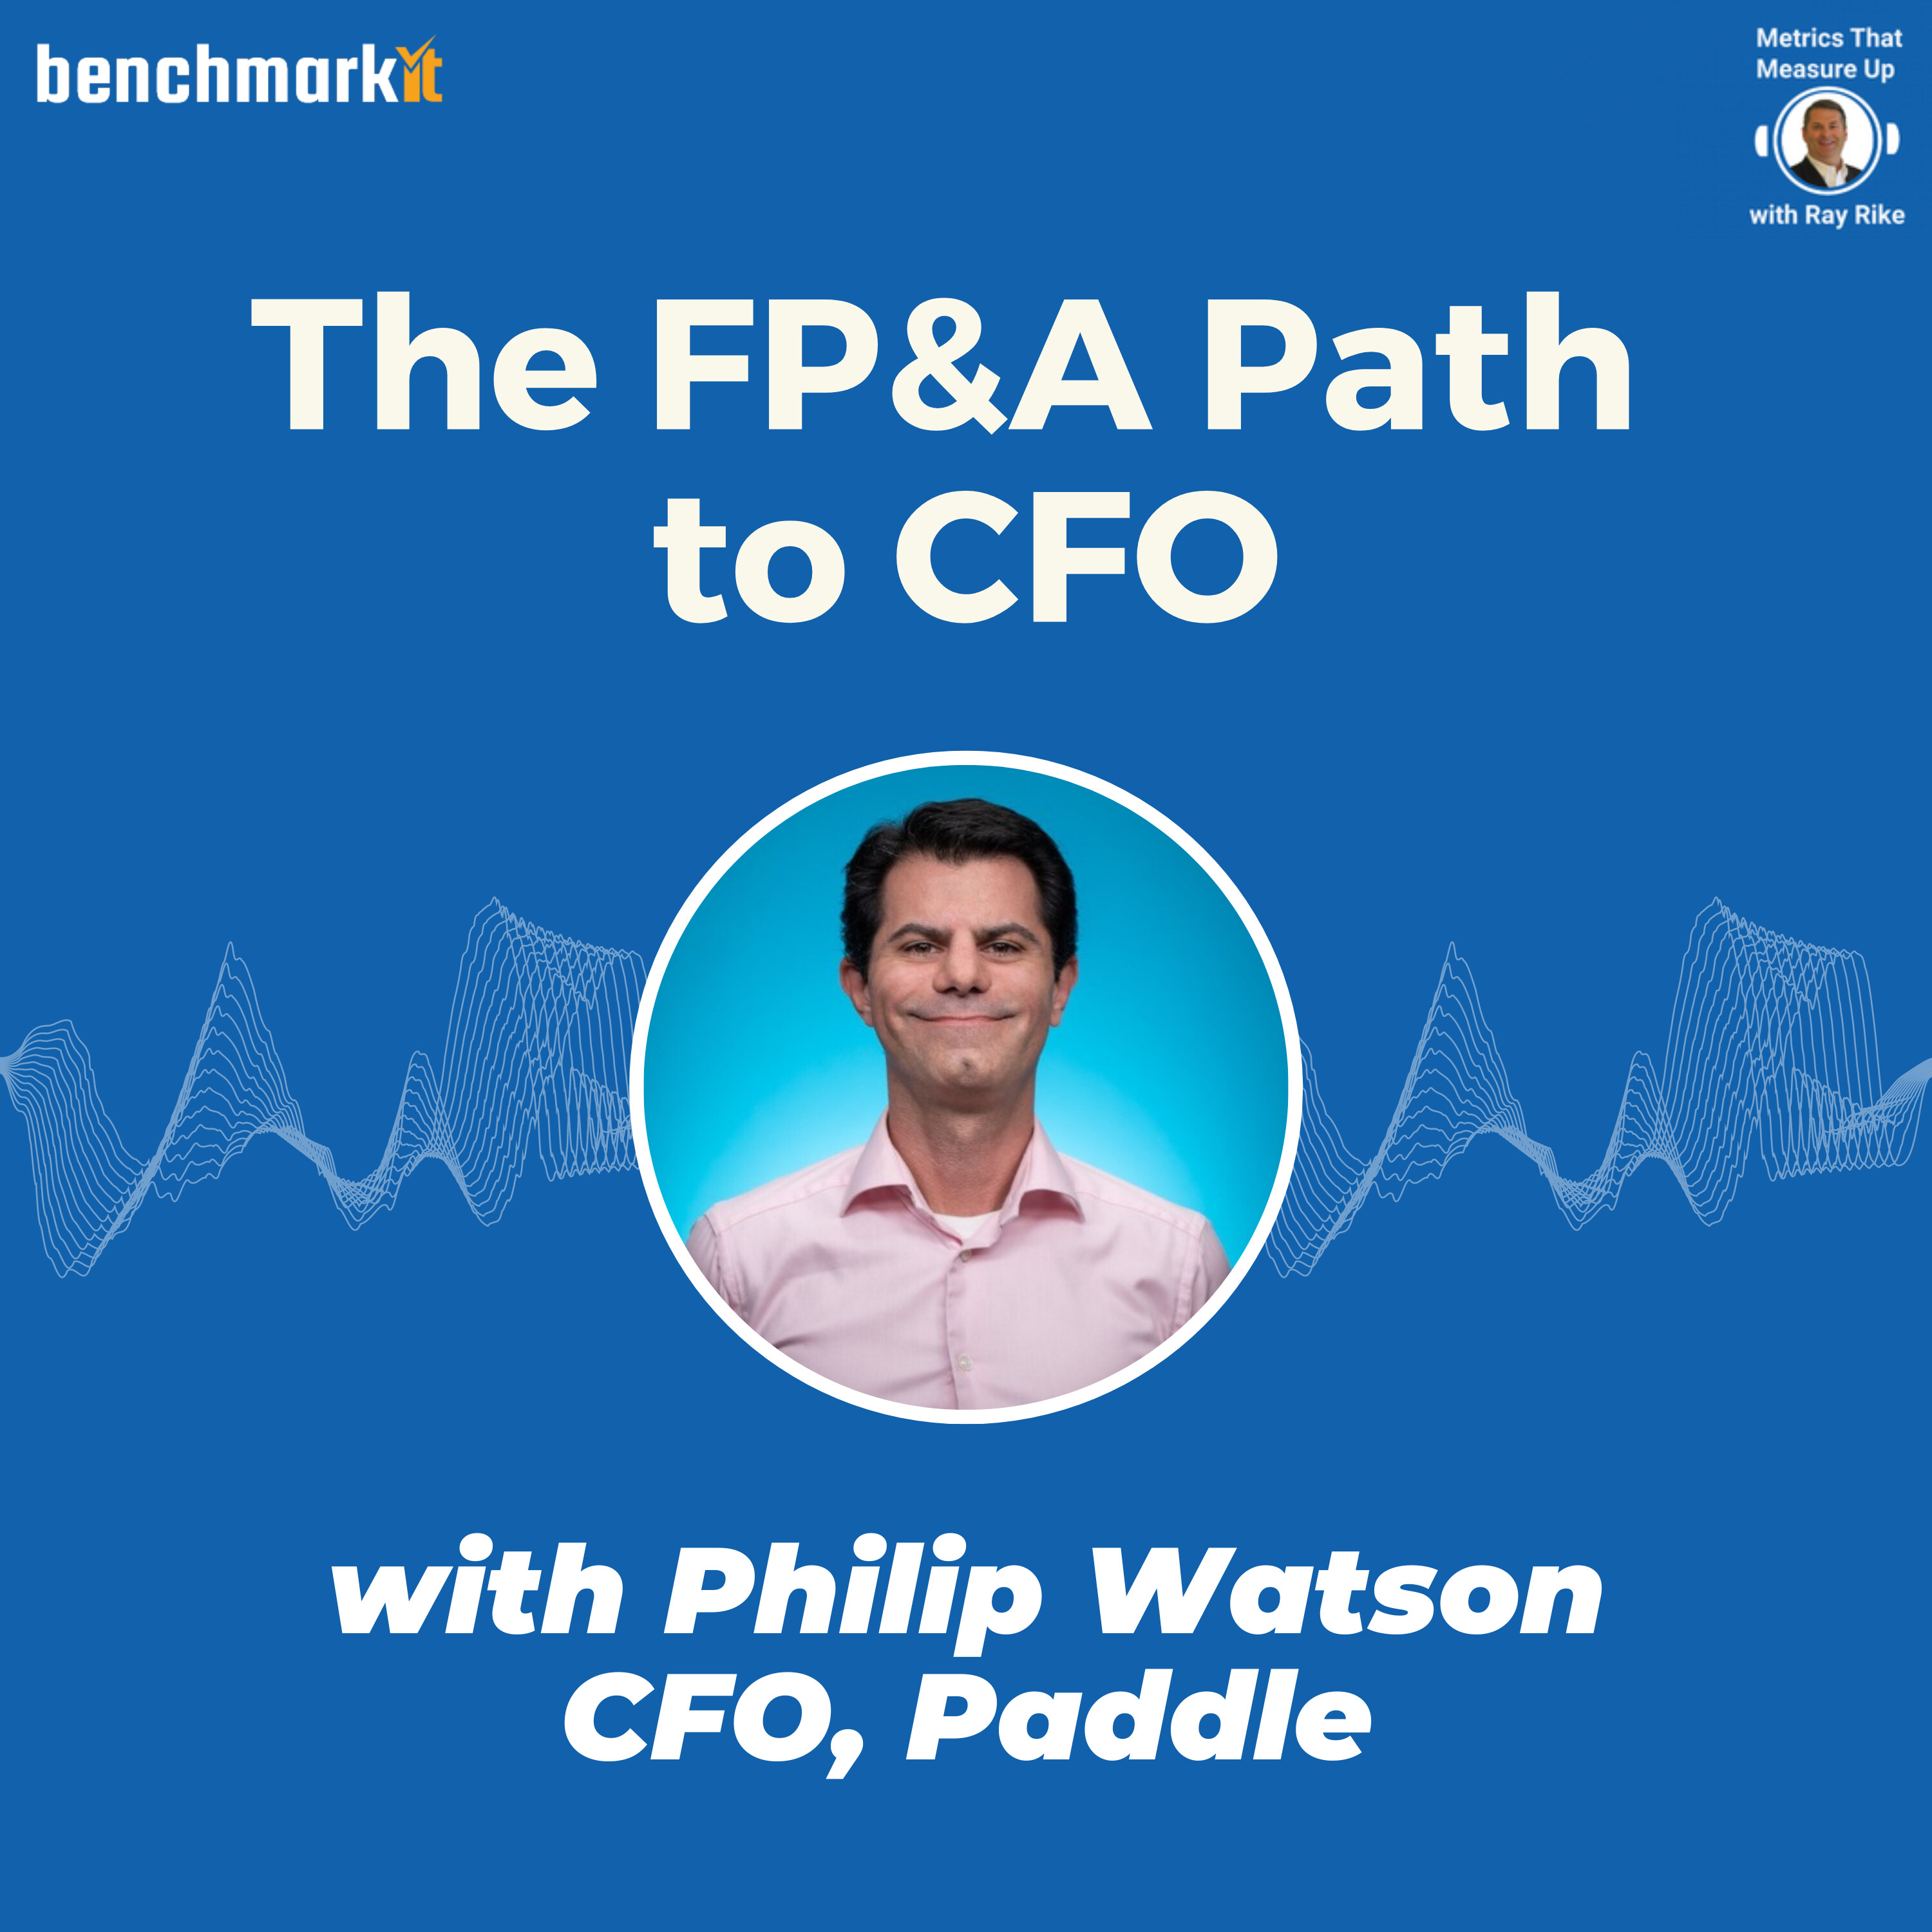 The Evolution of FP&A in SaaS - with Philip Watson, CFO Paddle